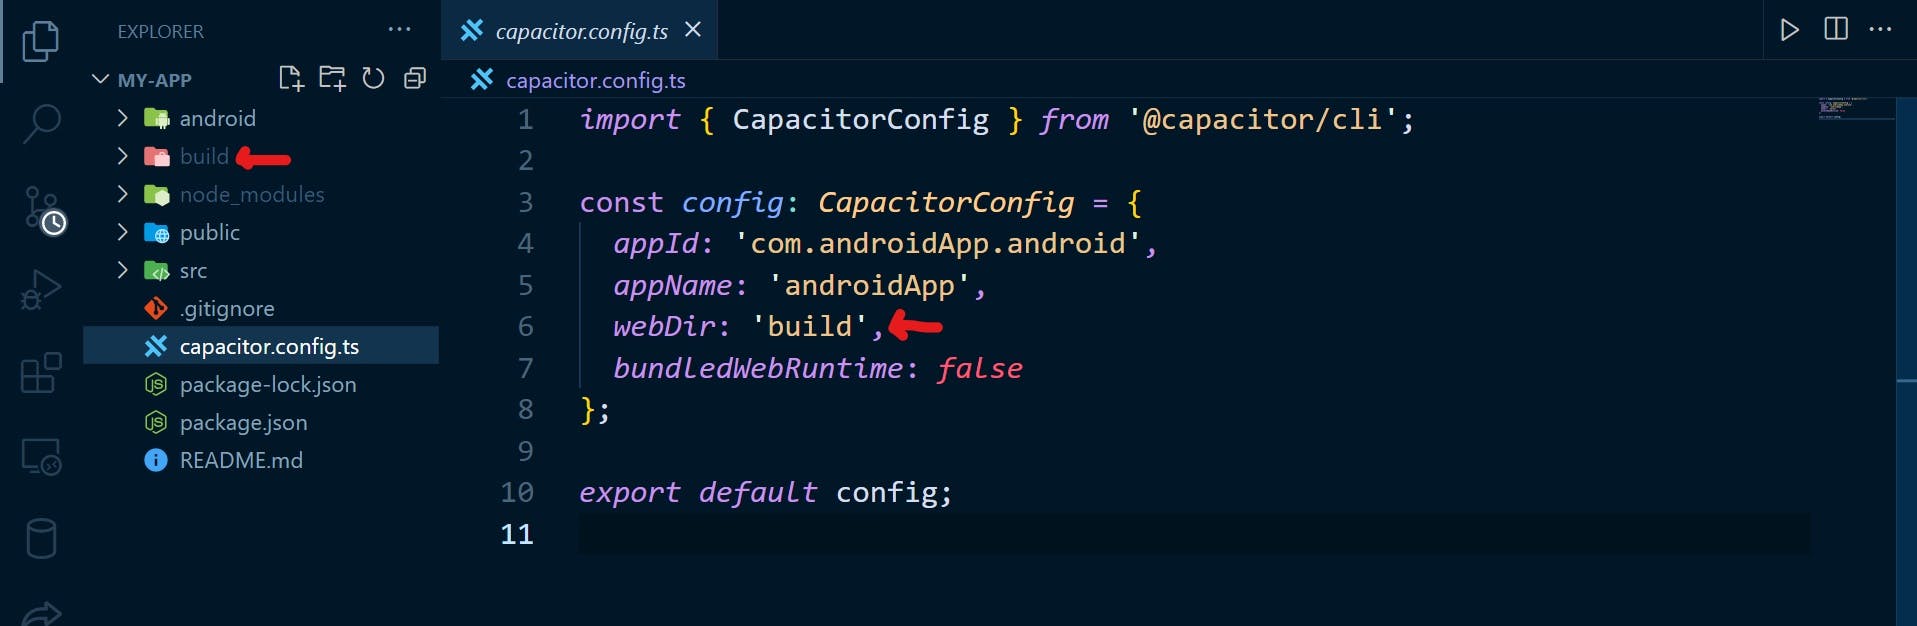 capacitor.config.ts file